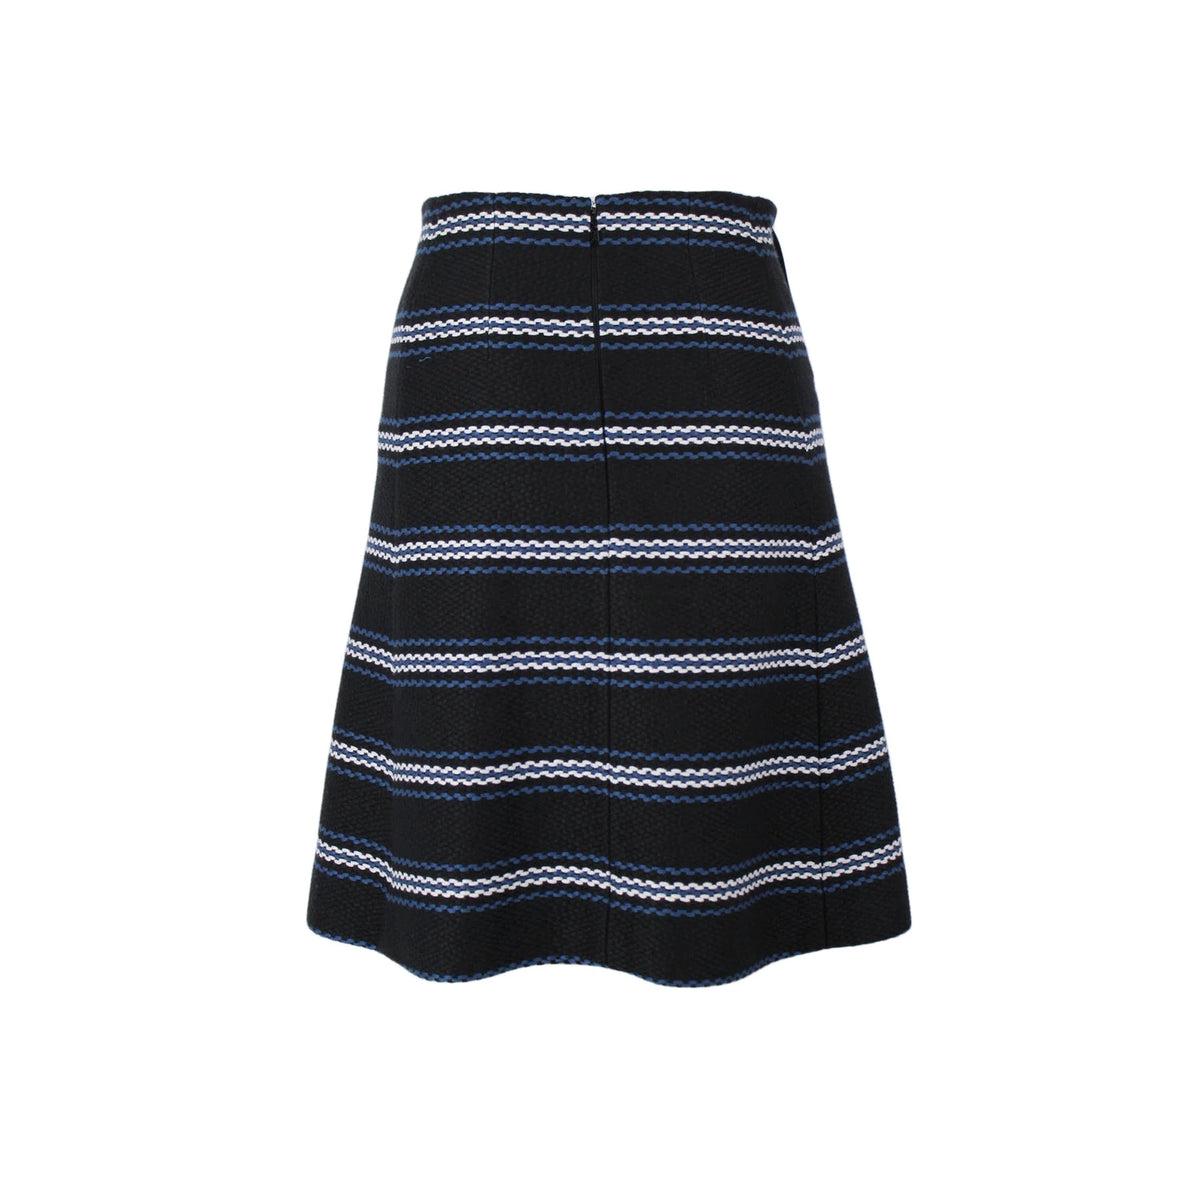 Pre-Owned CHLOE Black Woven Striped Skirt |  Size 38 FR - theREMODA